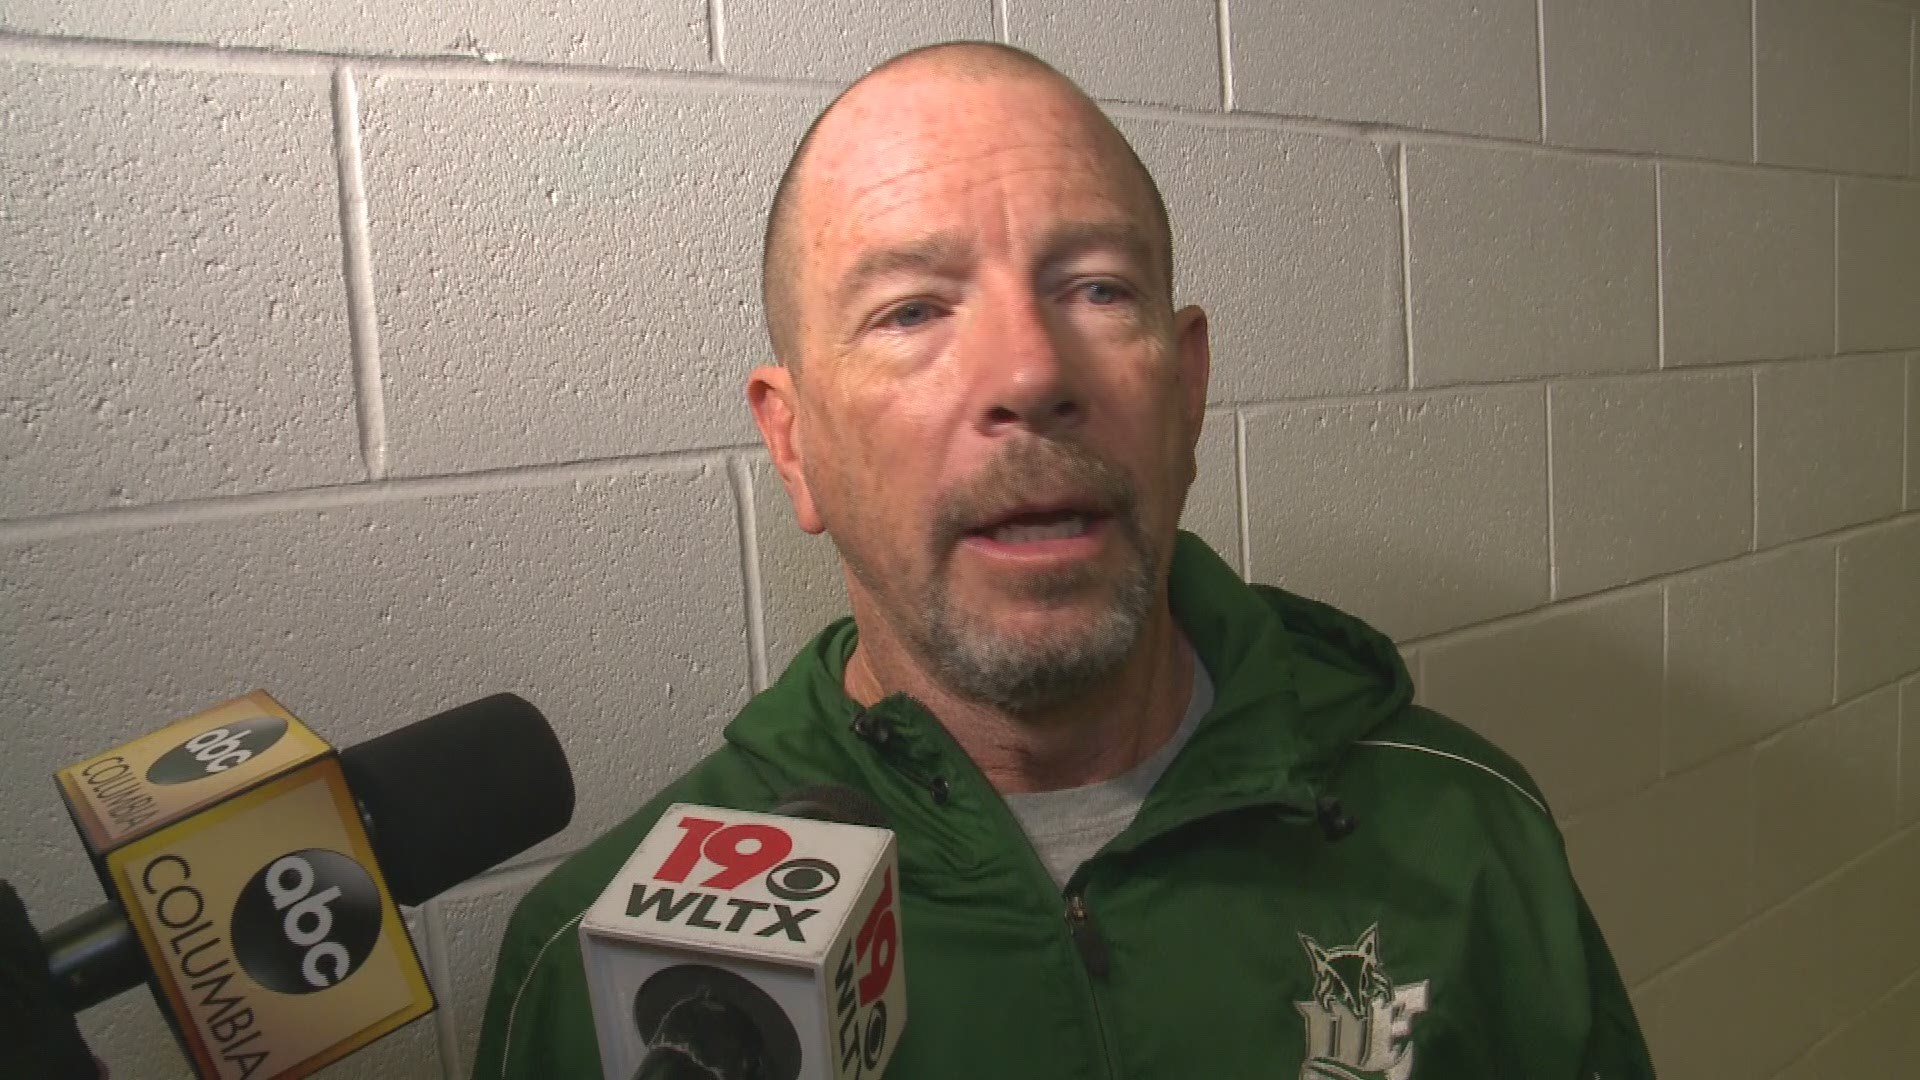 Dutch Fork head football coach Tom Knotts talks about what's next for Bryce Thompson and how he expects the 4-star prospect to meet his academic requirements and eventually put pen to paper and sign with a school.